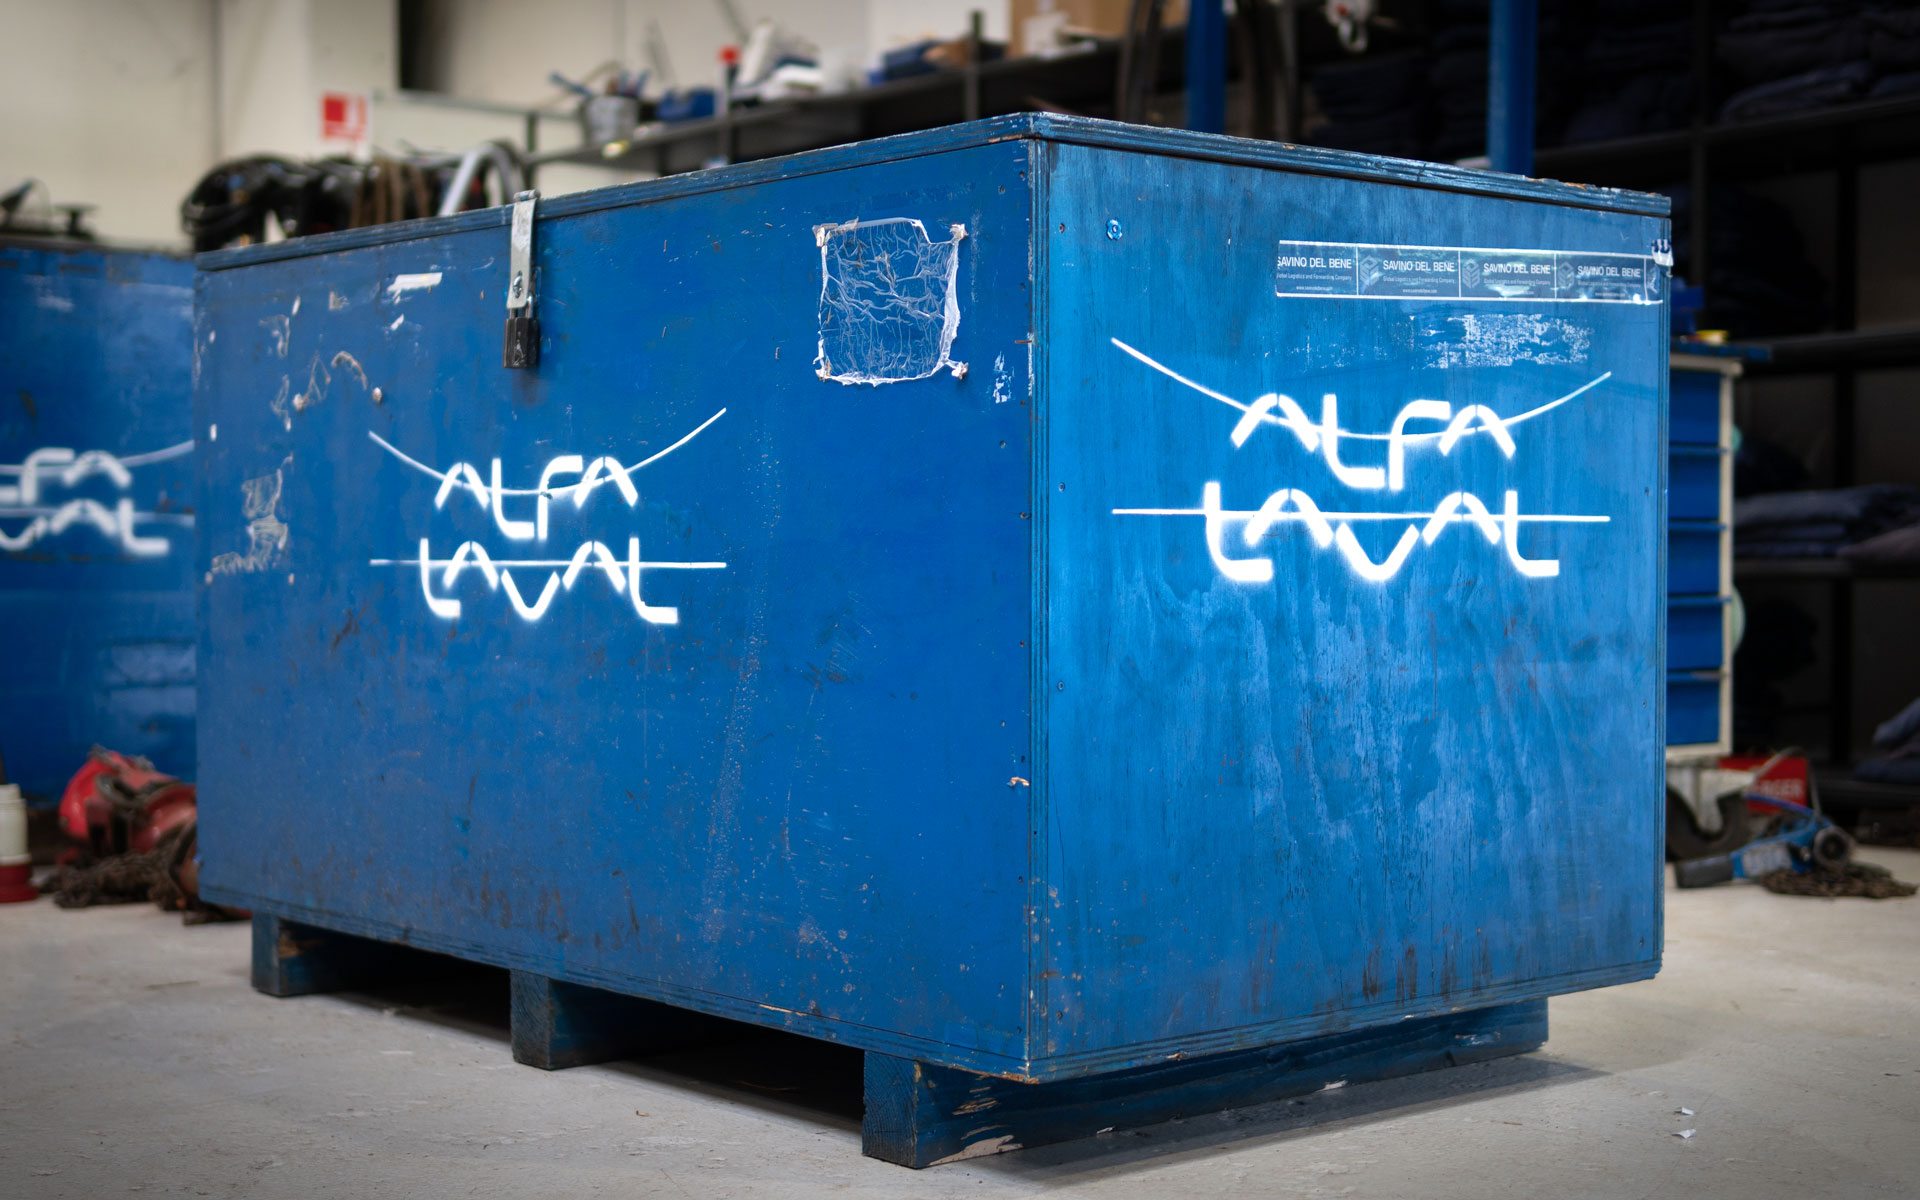 Alfa Laval crate with Omega Yard inside